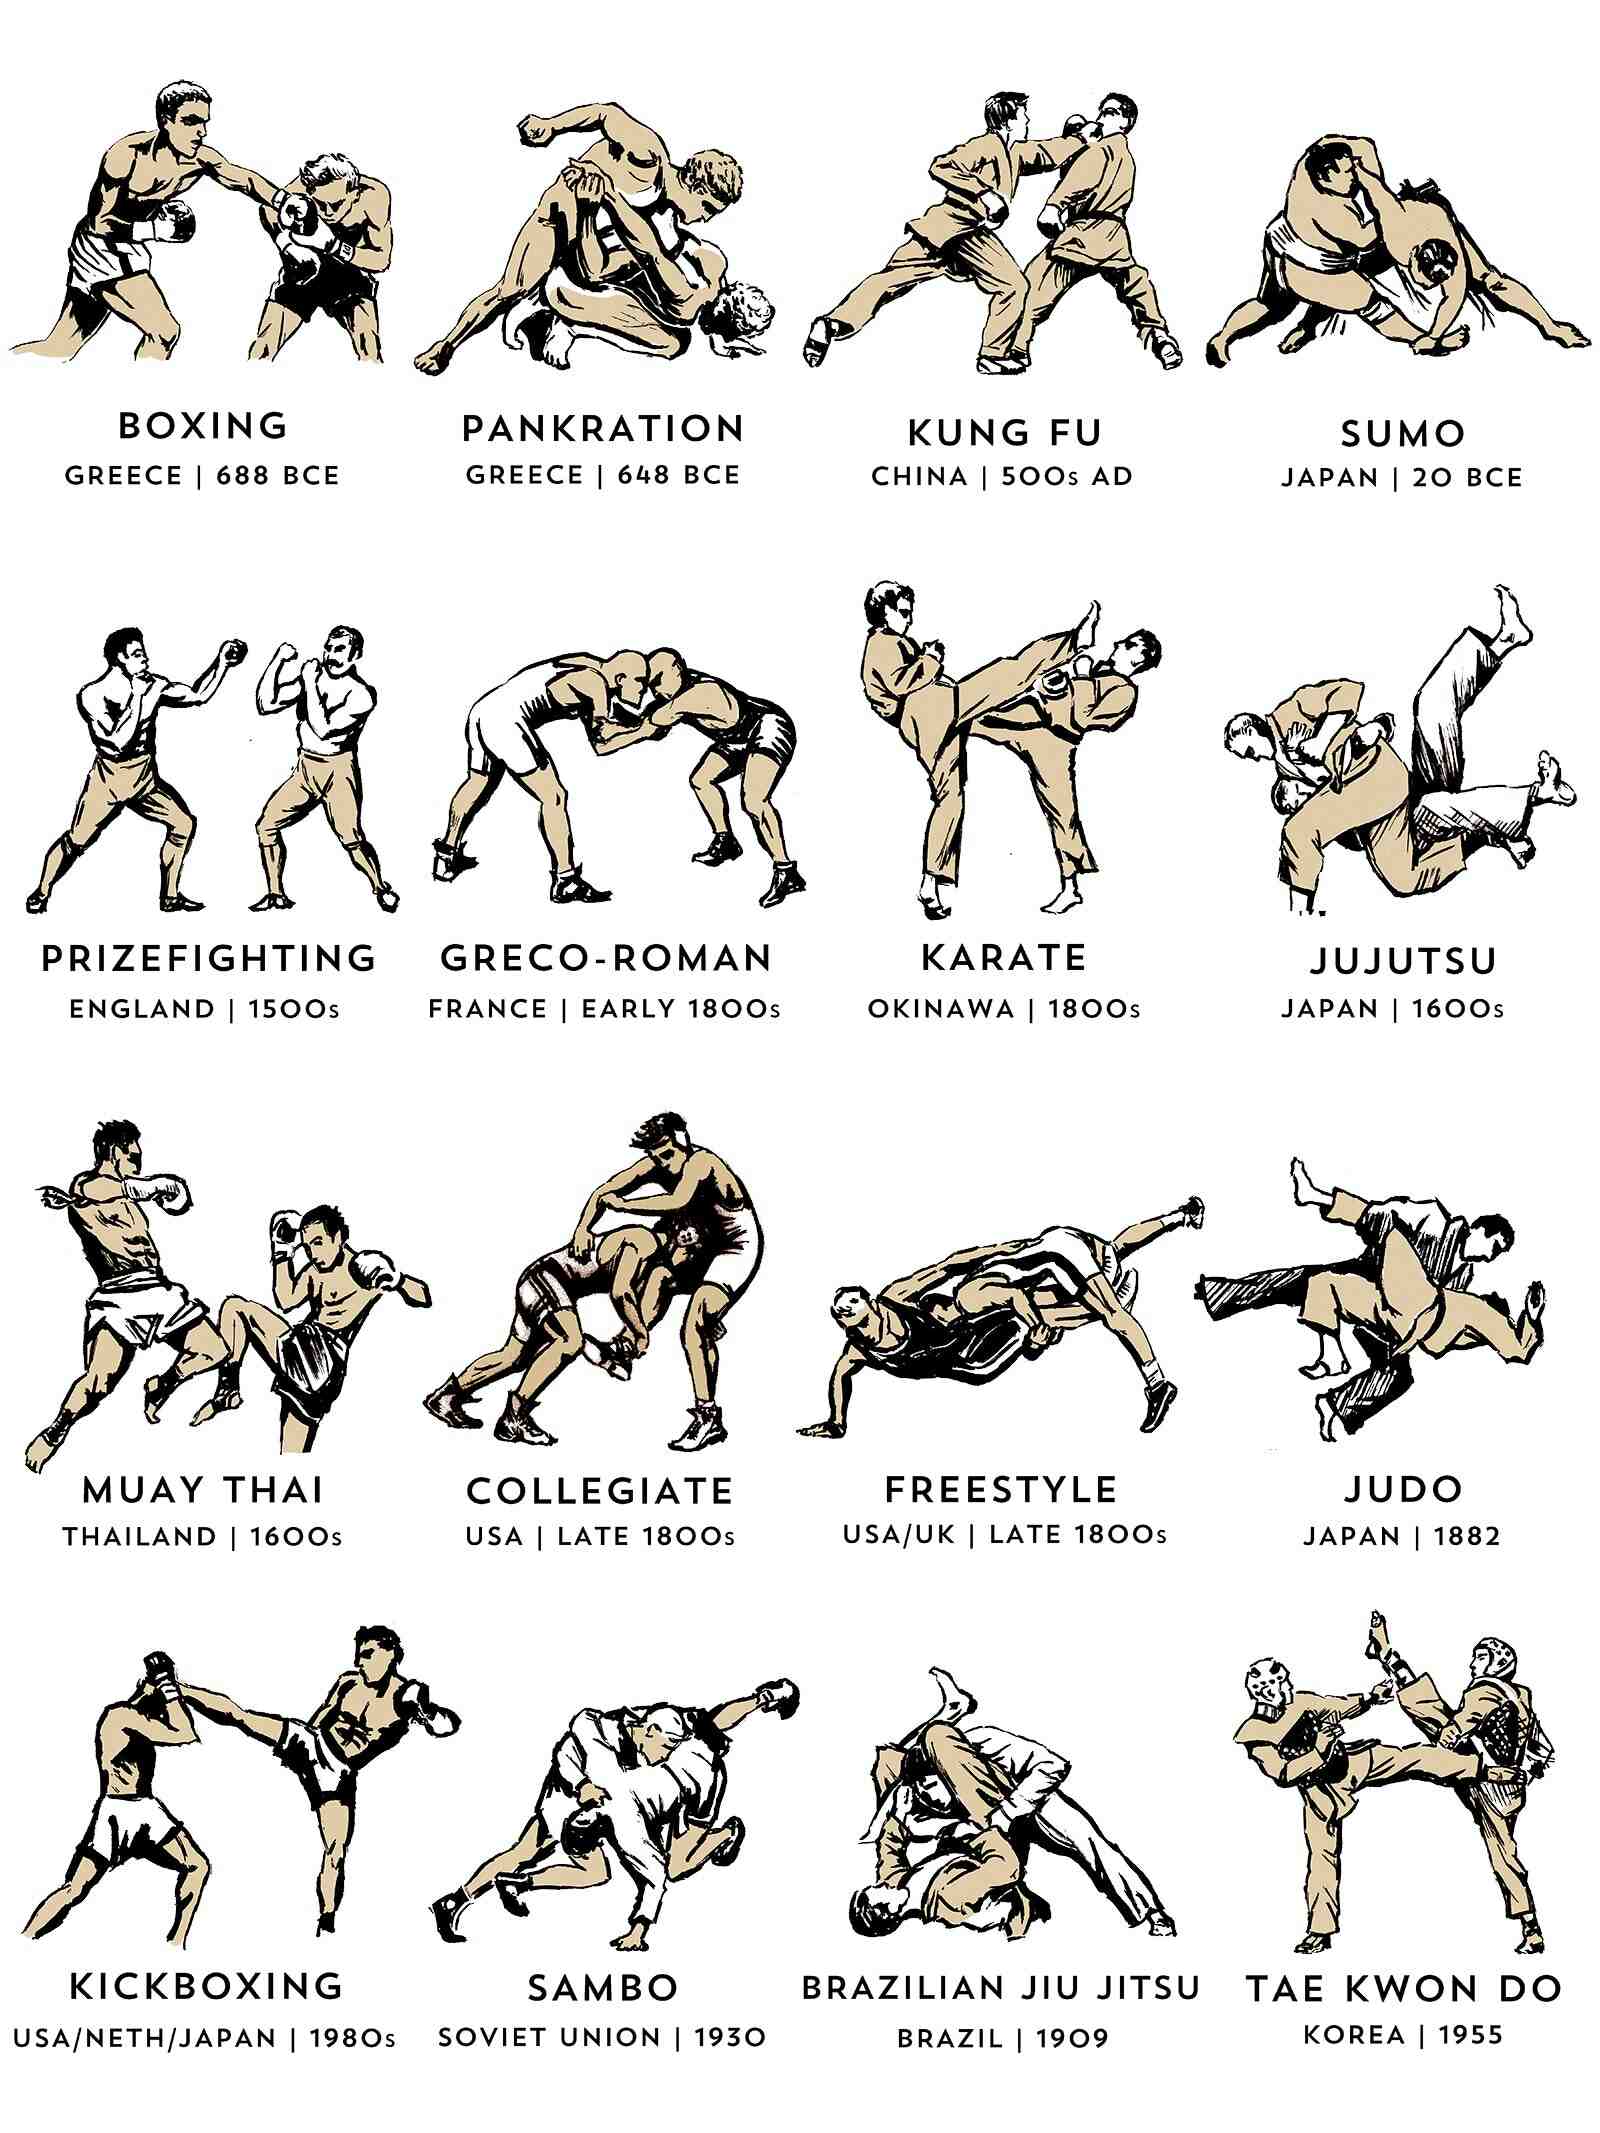 How many different types of martial arts are there?